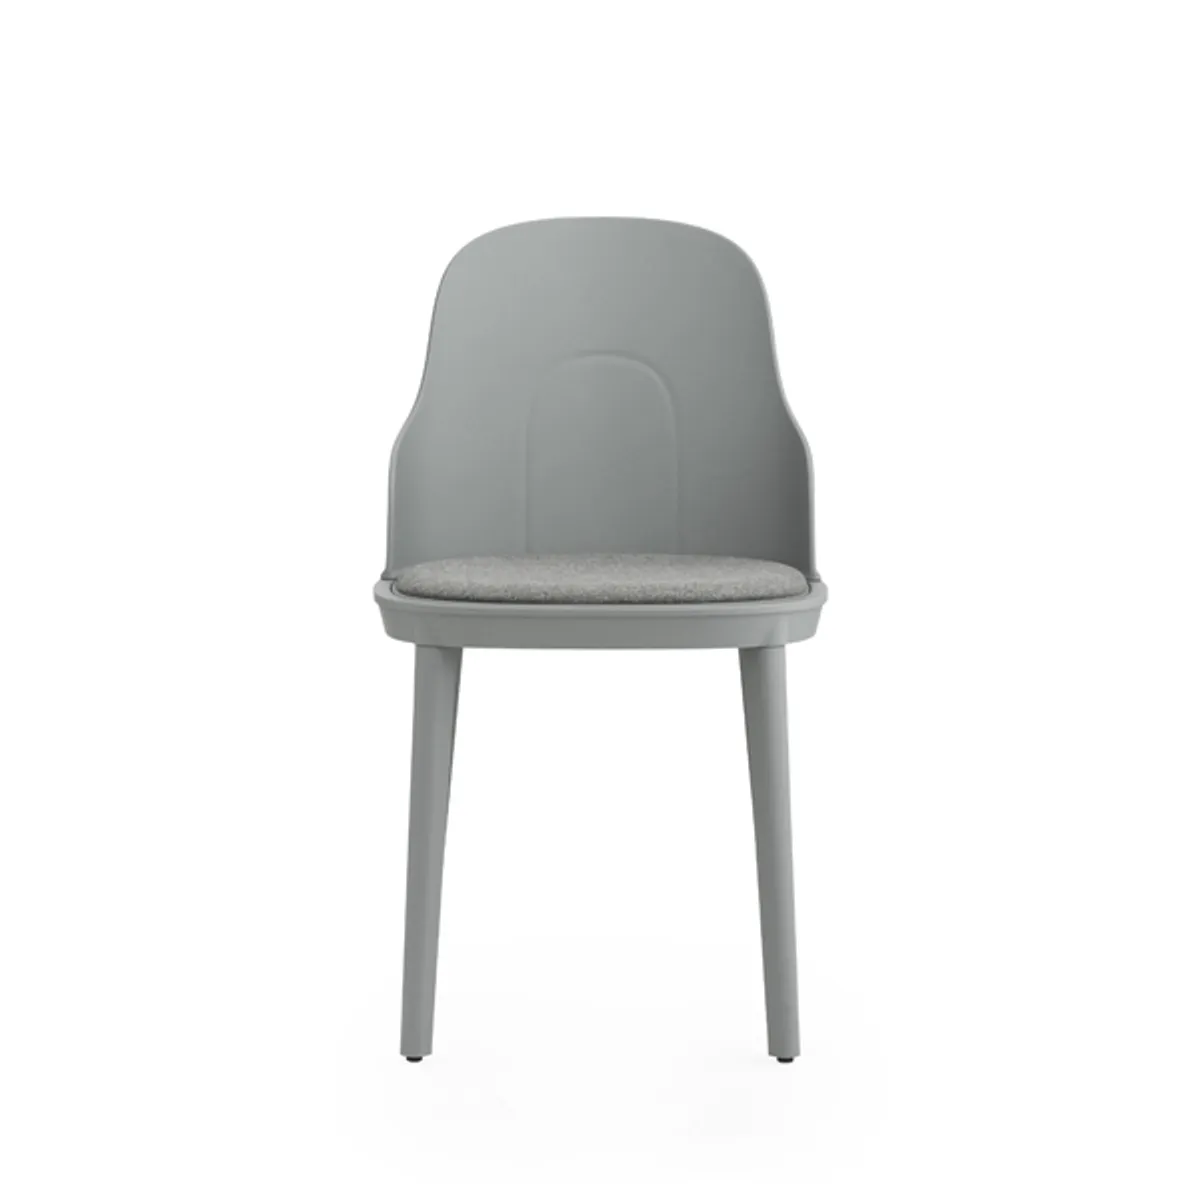 Bon soft poly chair Inside Out Contracts2